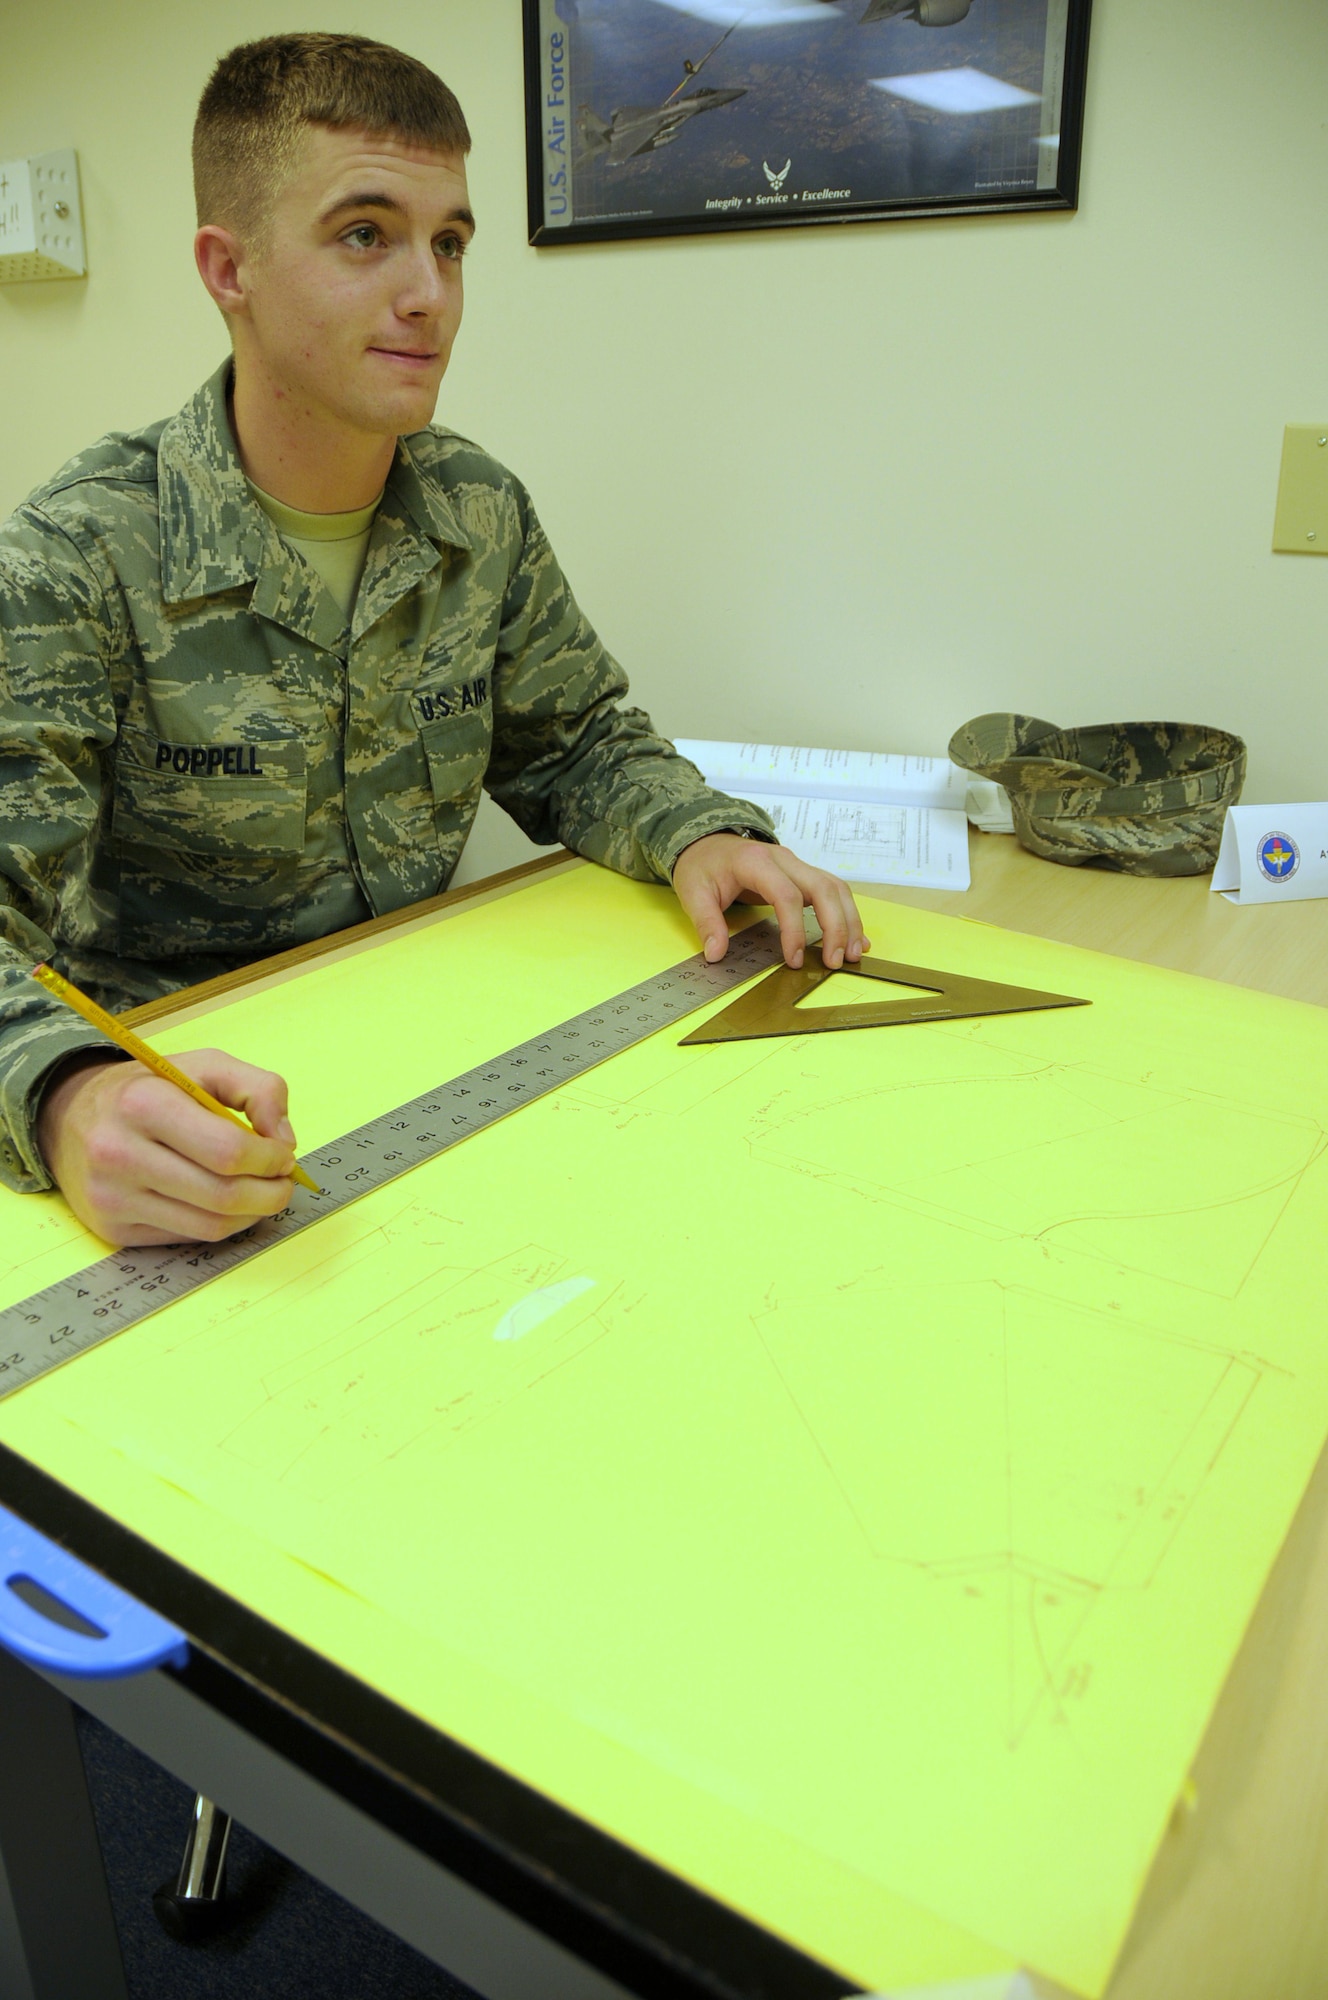 Airman 1st Class Zachery Poppell sketches schematics in the metals layout segment of
the Air Force unique segment of the course. (Photo by Airman 1st Class Heather Holcomb)